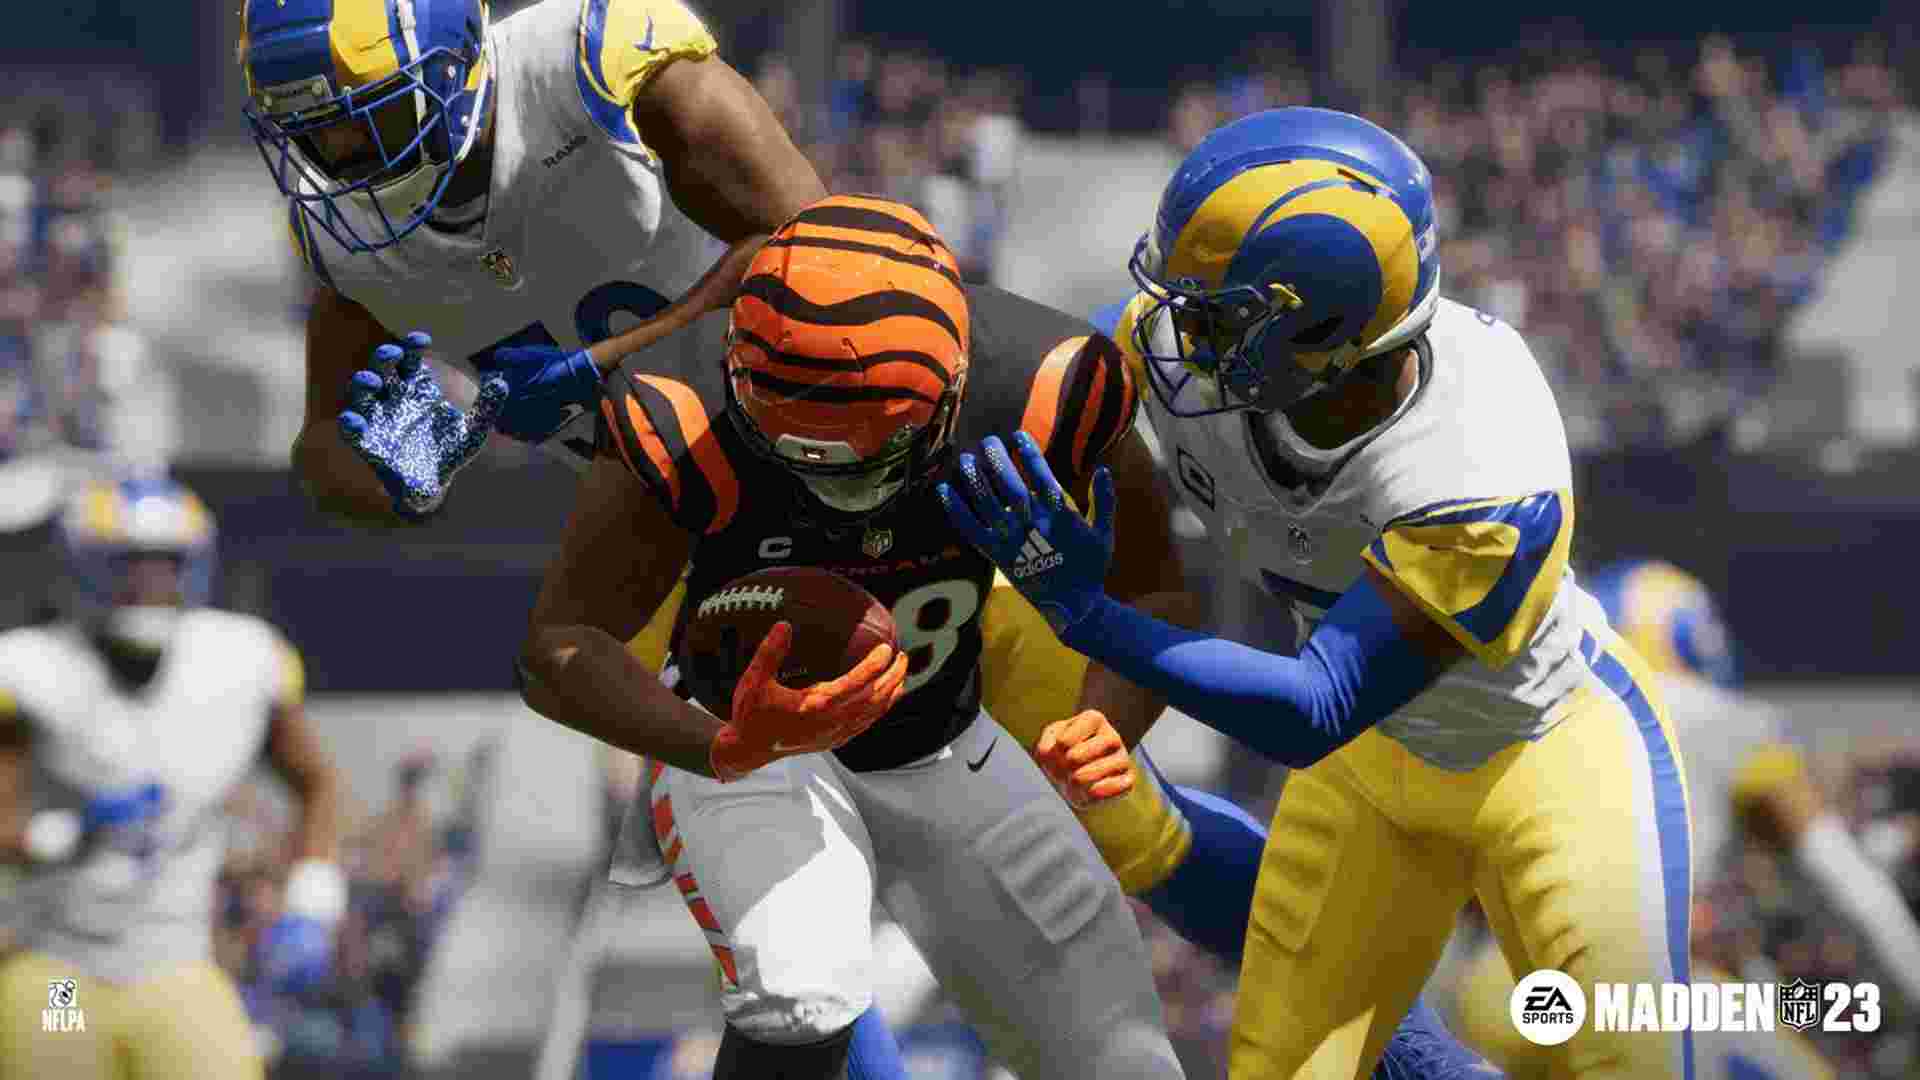 Madden NFL 23 Upgrade tokens lost in Team Captain exchange for many players : Is there any fix yet